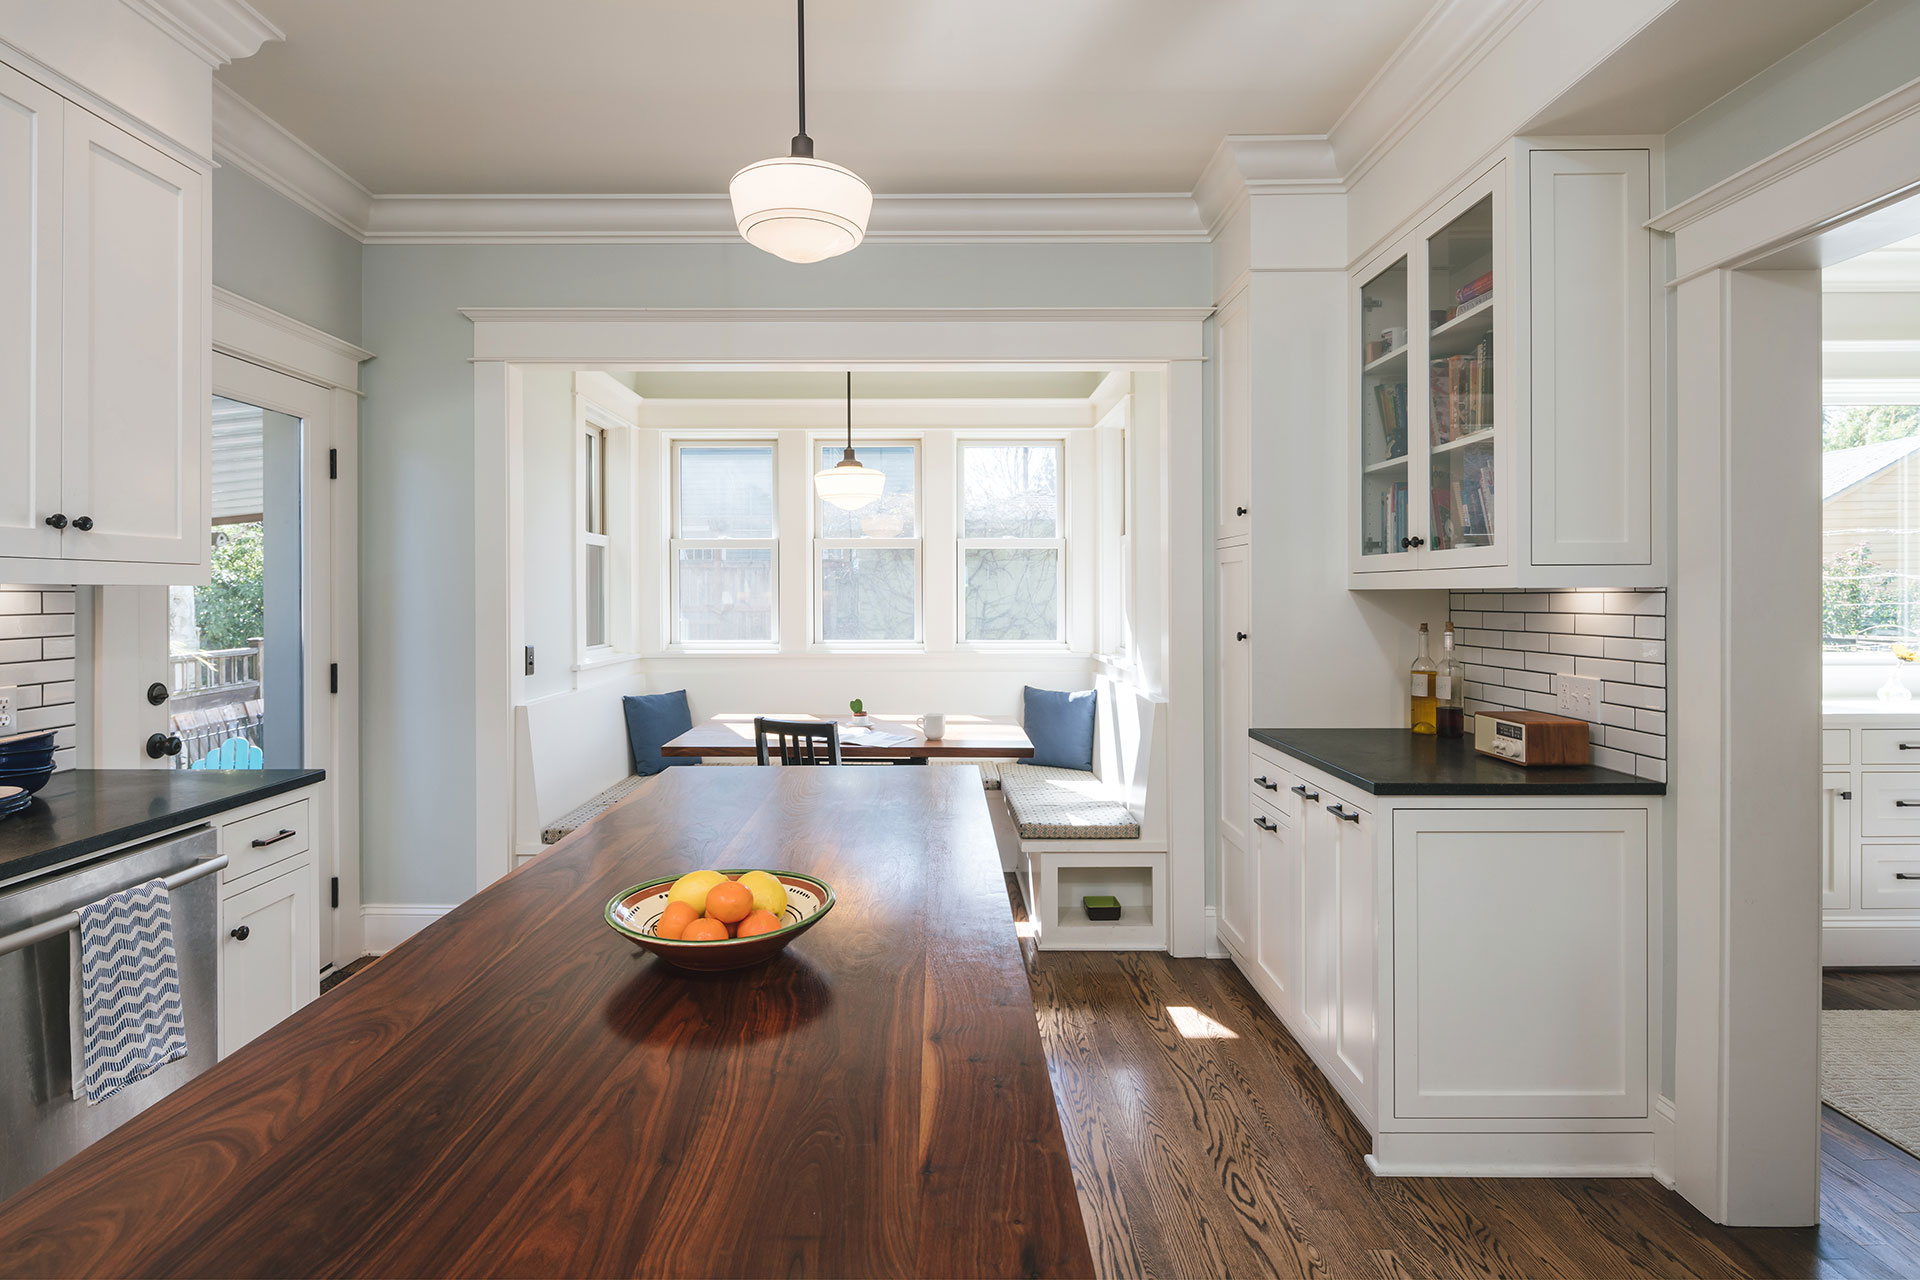 The renovated kitchen at the Laurelhurst Craftsman is bright and functional. An island sits in the middle, providing extra space for meal prep.